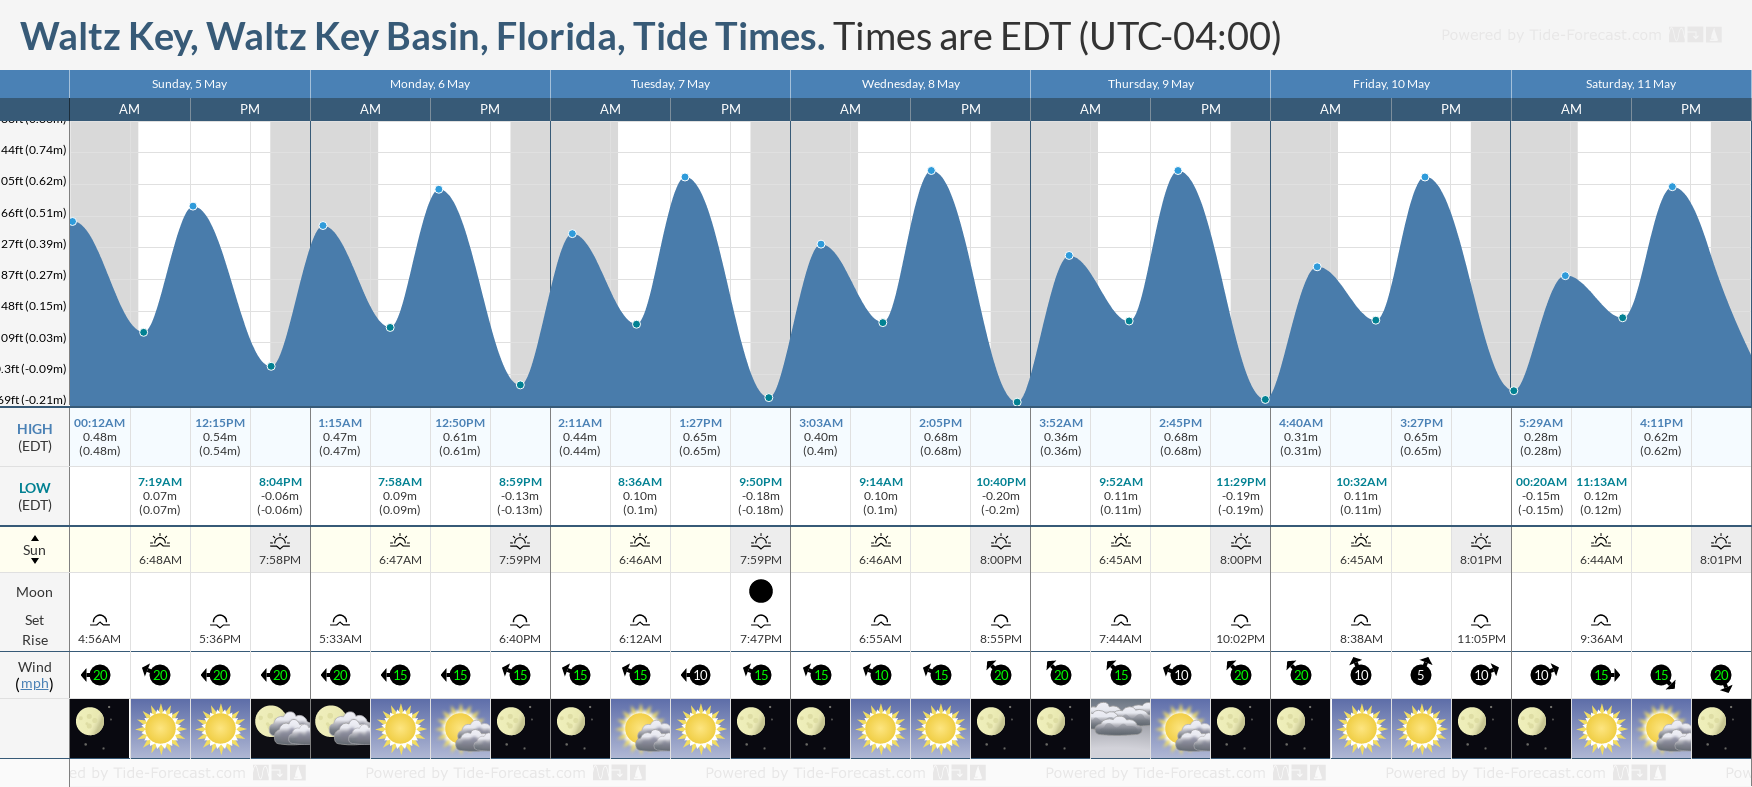 Waltz Key, Waltz Key Basin, Florida Tide Chart including high and low tide tide times for the next 7 days